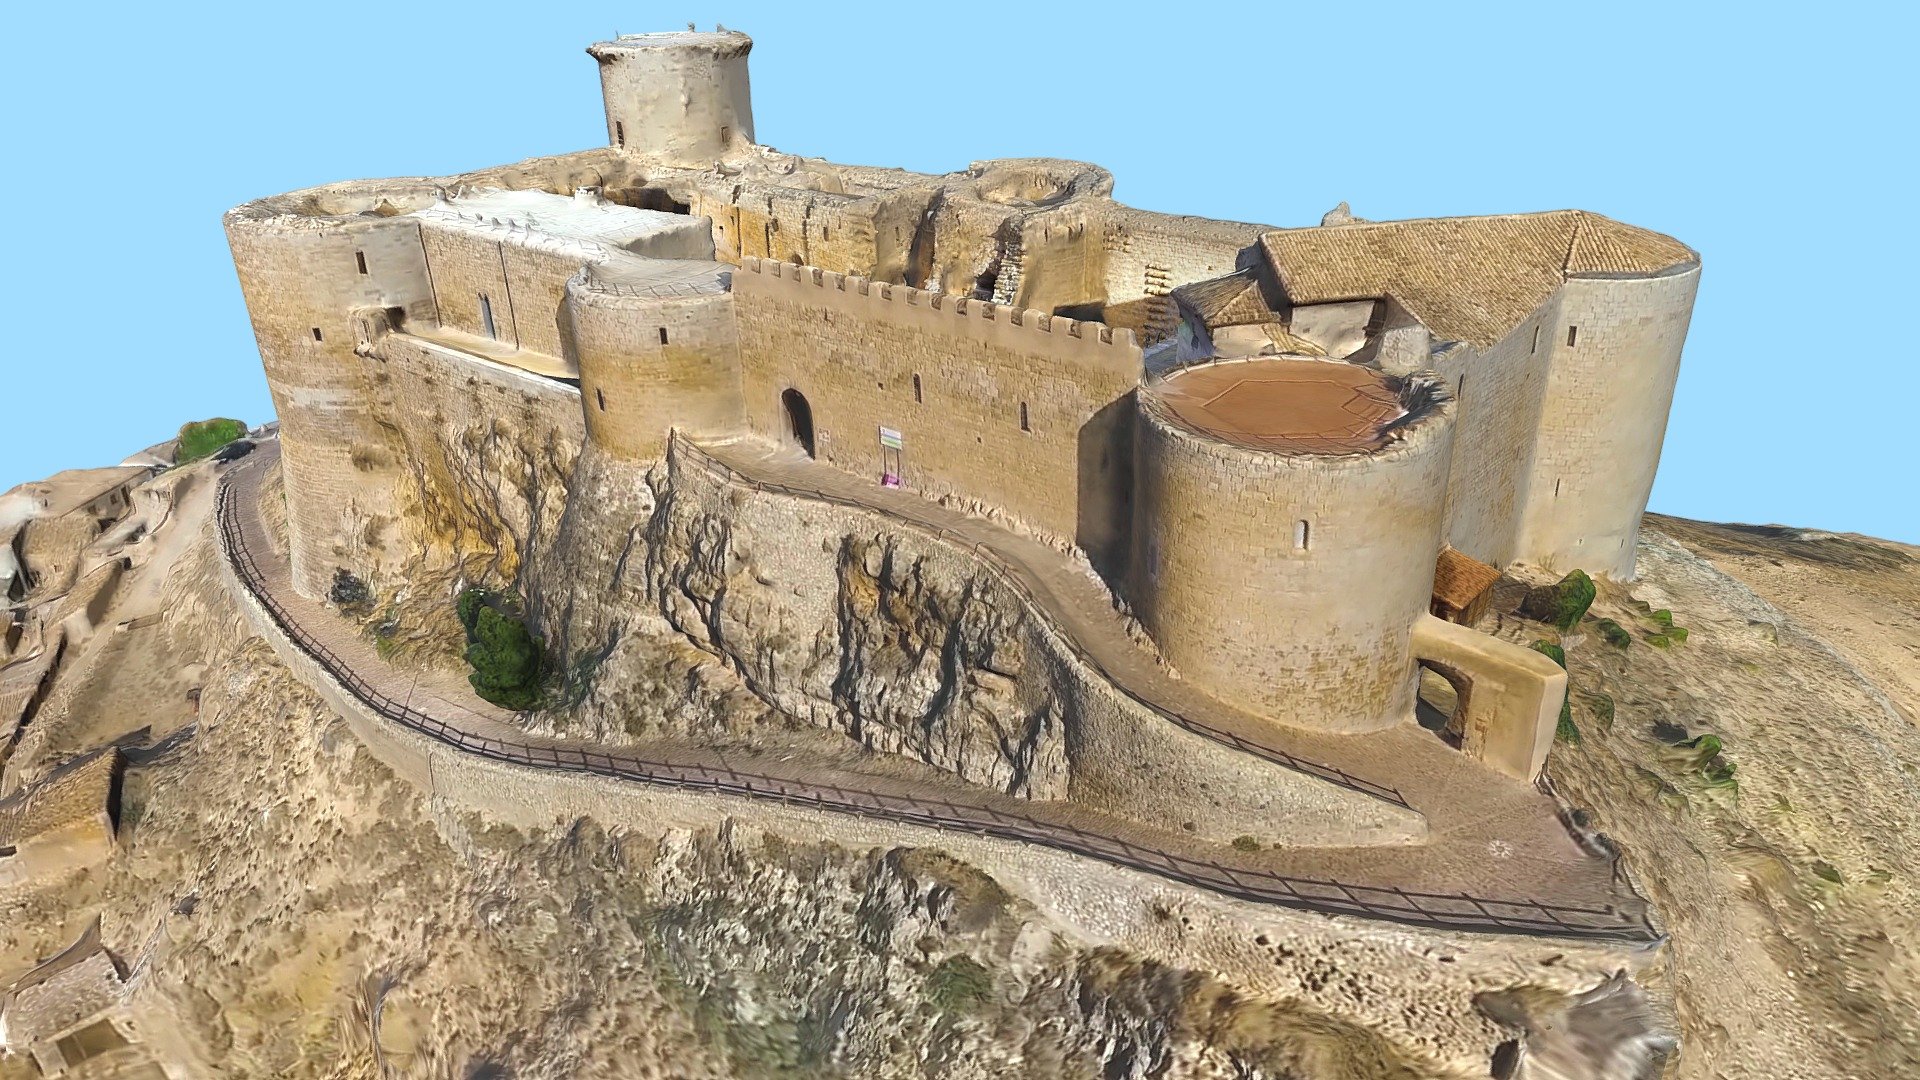 The Castle of Mesones de Isuela, which is located at the top of a rocky village above the town of Mesones de Isuela (Aranda)-Spain, is one of the largest castles in Aragon. It belonged to the Templars and the house of Luna. The first reference to the castle is the donation of Sancha de Abiego to the Templars in 1175. The Order of the Temple kept it until the end of its existence.

In the fourteenth century it was of the Fernández de Luna. The Archbishop of Zaragoza Lope Fernández de Luna had the building built that can be seen today and gave it in his will along with the towns of Tierga, Jarque de Moncayo, Sestrica, Nigüella and Lucena de Jalón to his sister Toda. When Archbishop Lope Ferrández de Luna died in 1382 the castle was almost abandoned. It passed into the hands of the Ximénez de Urrea upon Toda's death.

The fortress of Mesones de Isuela is built in limestone and consists of a rectangular plan&hellip;
Source: Wikipedia.org - Castillo de Mesones de Isuela, Castle, Spain - Buy Royalty Free 3D model by LibanCiel 3d model